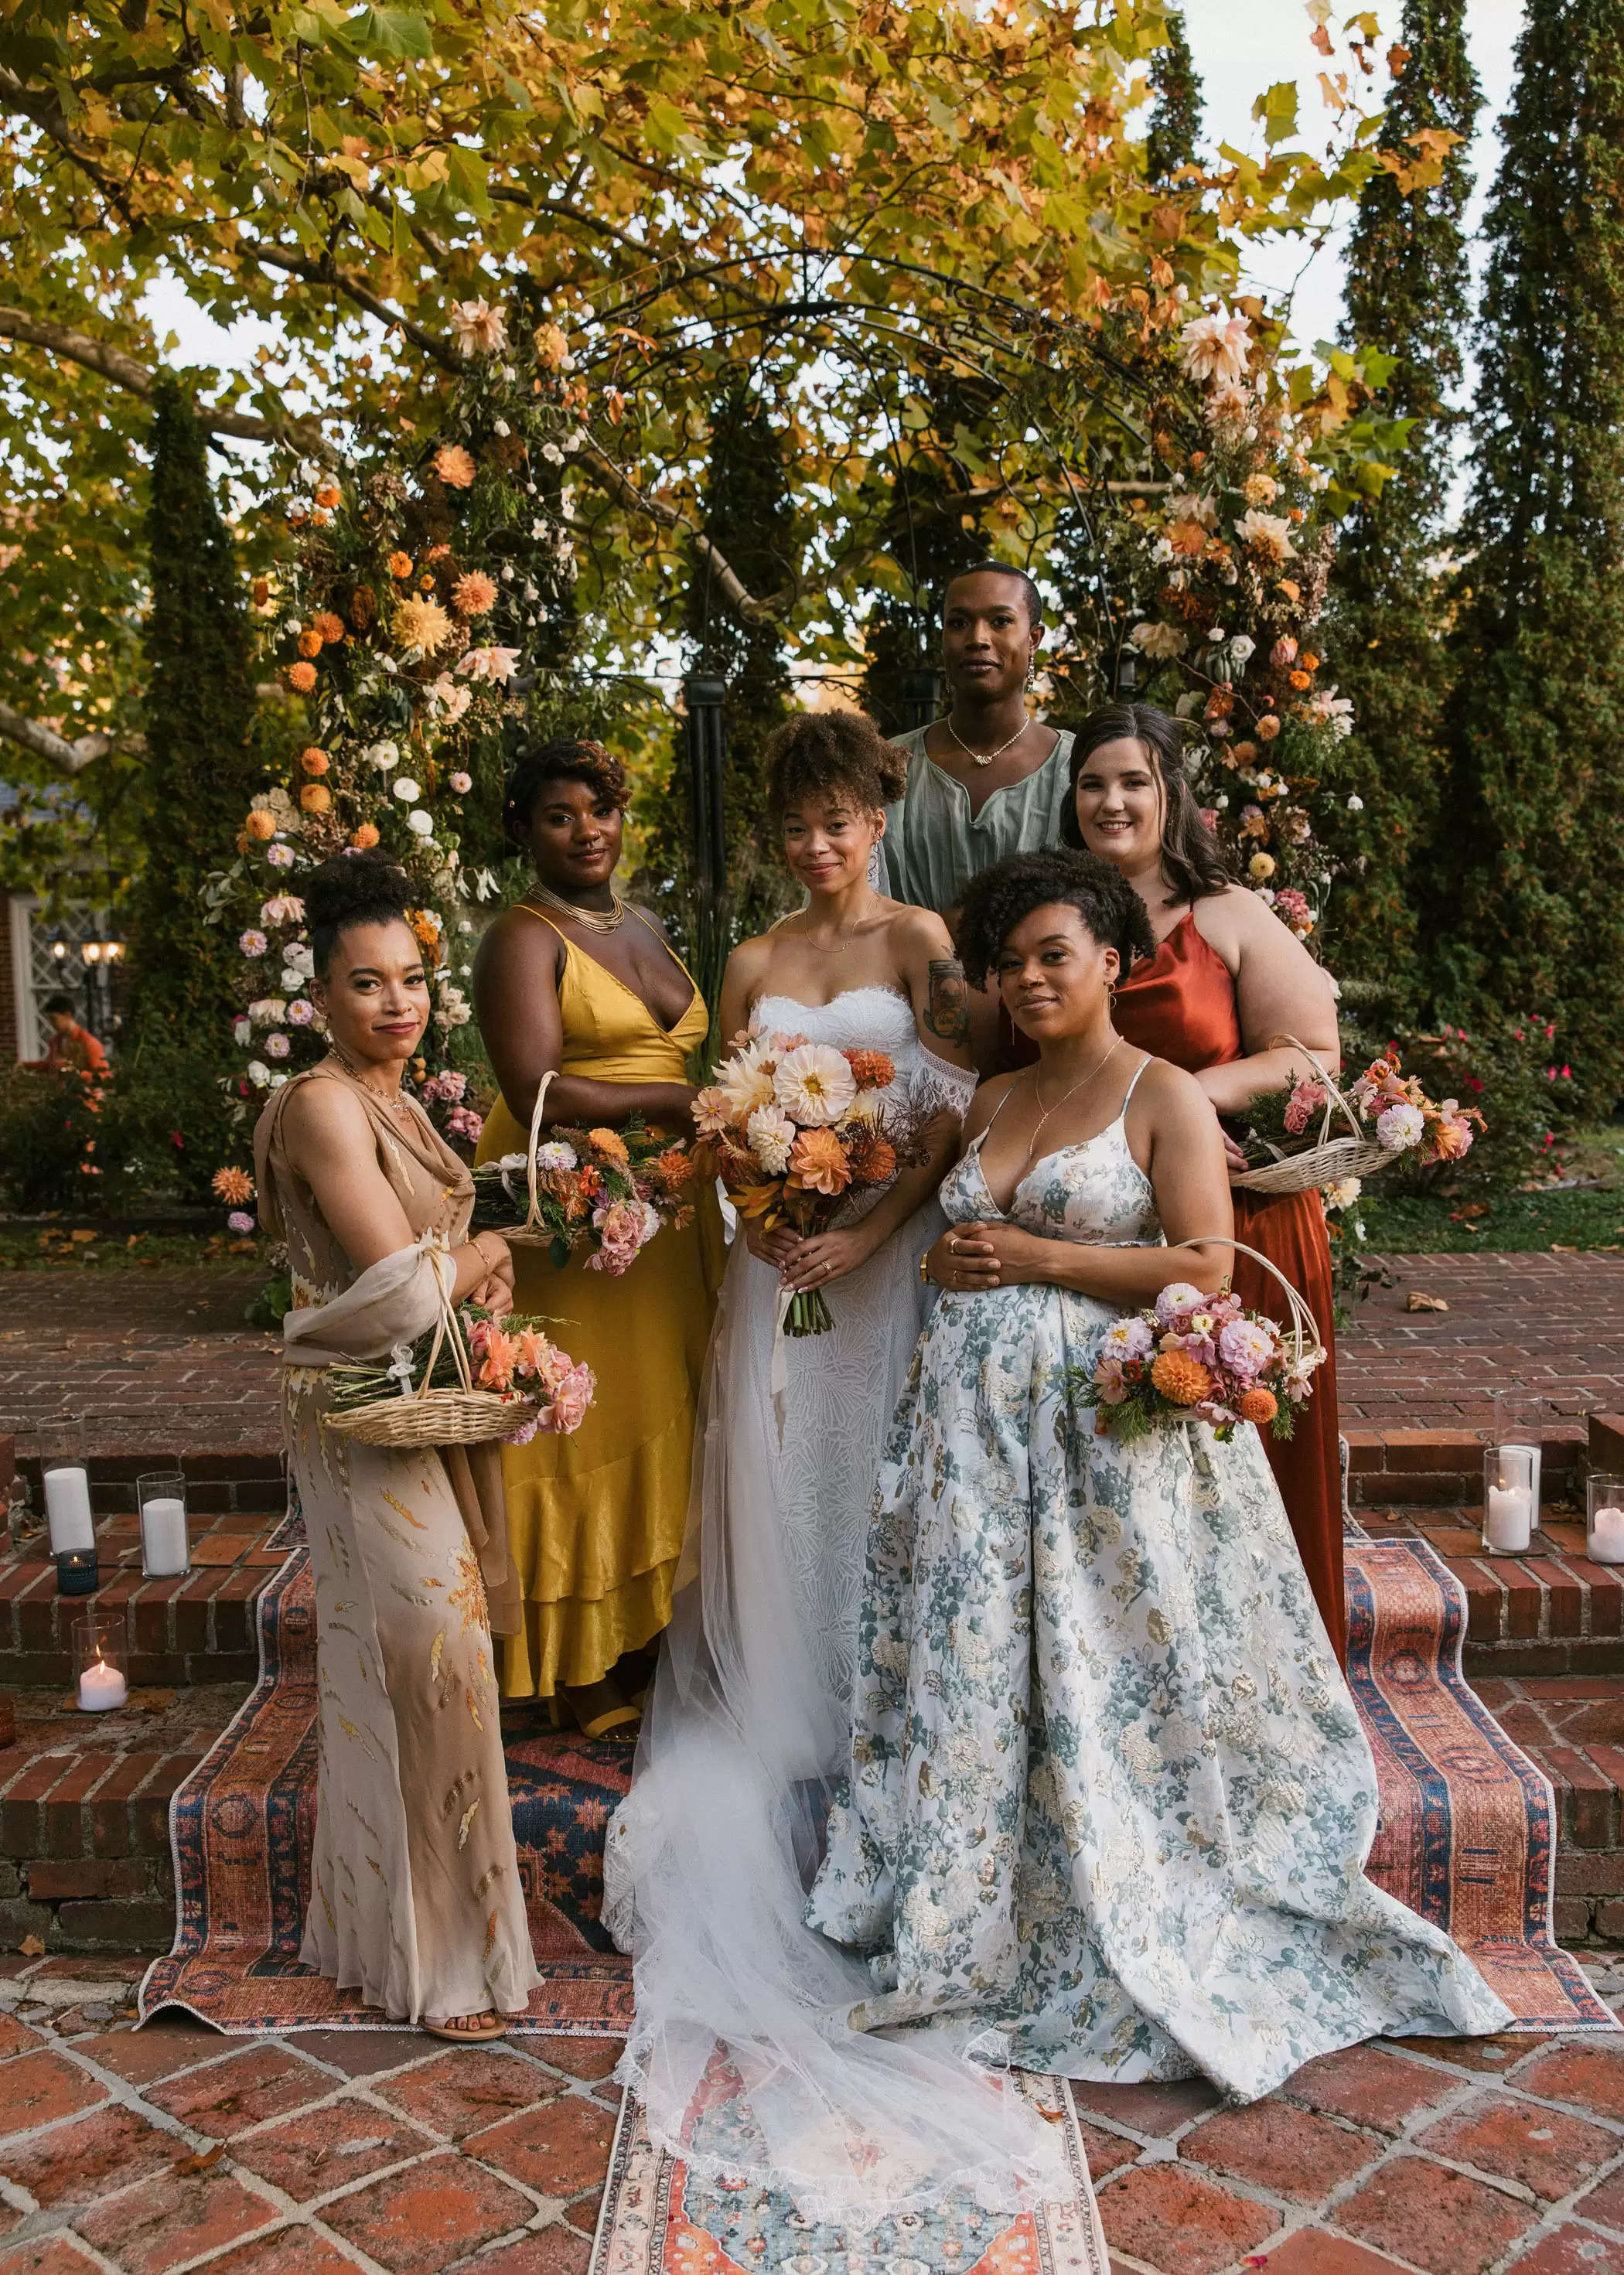 The Bride Was Barefoot For This Free-Spirited Fall Marriage ceremony